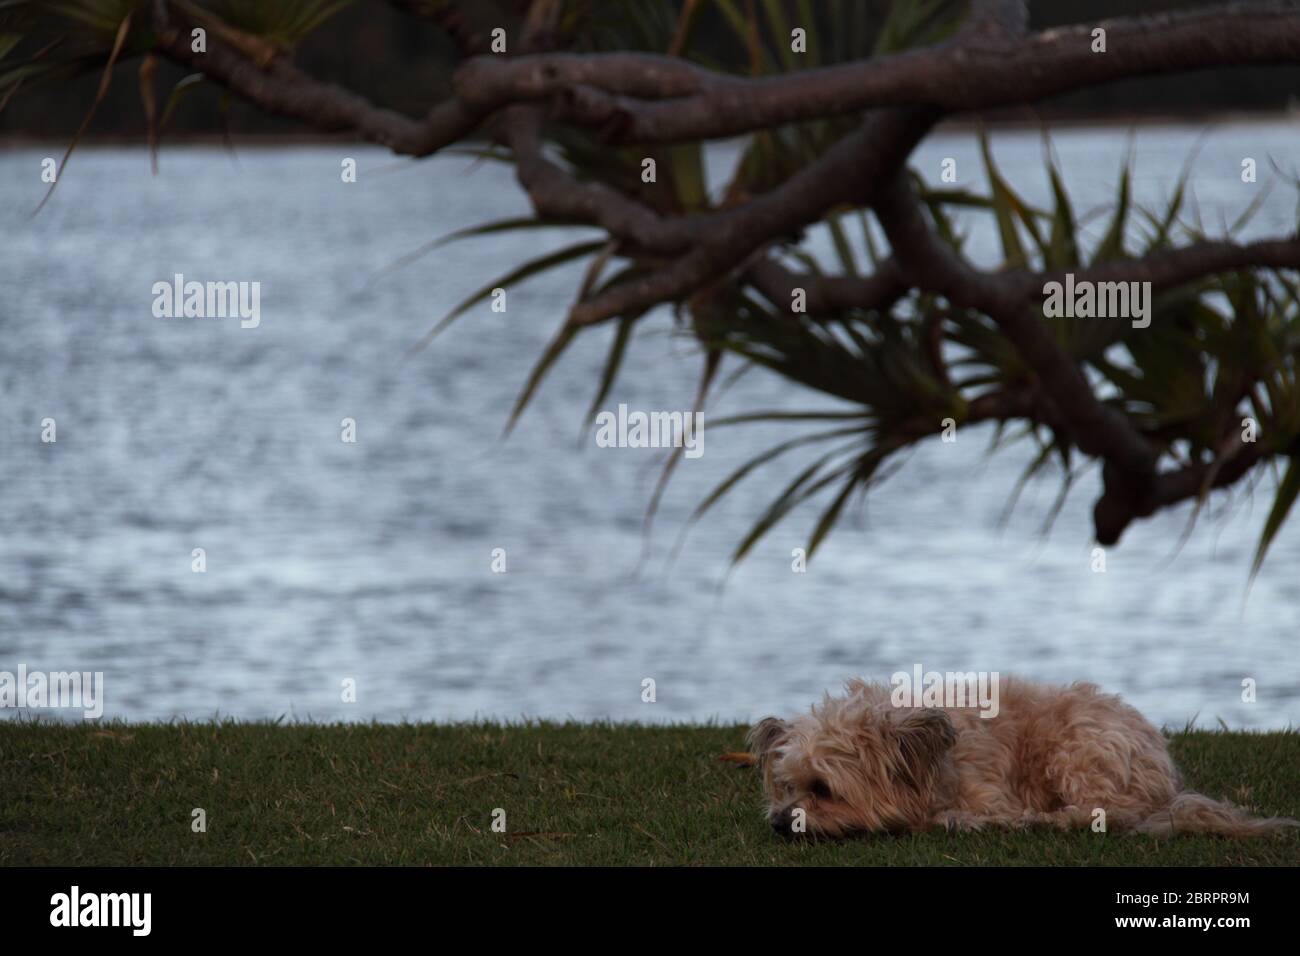 Bored Yorkshire Terrier Dog (Canis Familiaris) Resting in Park Stock Photo